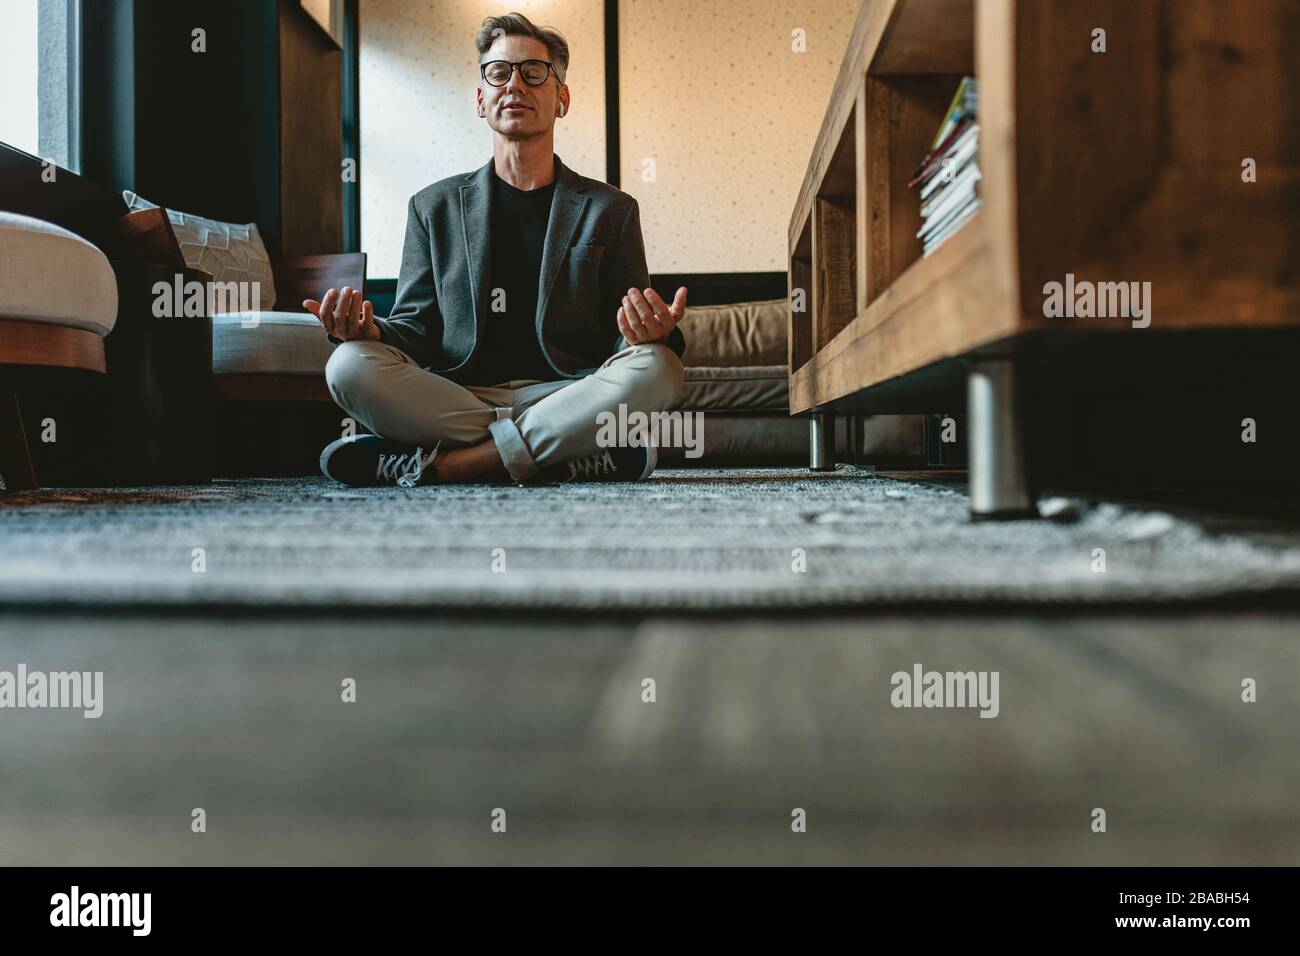 Low angle shot of a mid adult businessman doing yoga meditation. Business professional meditating in yoga pose in office lounge area. Stock Photo